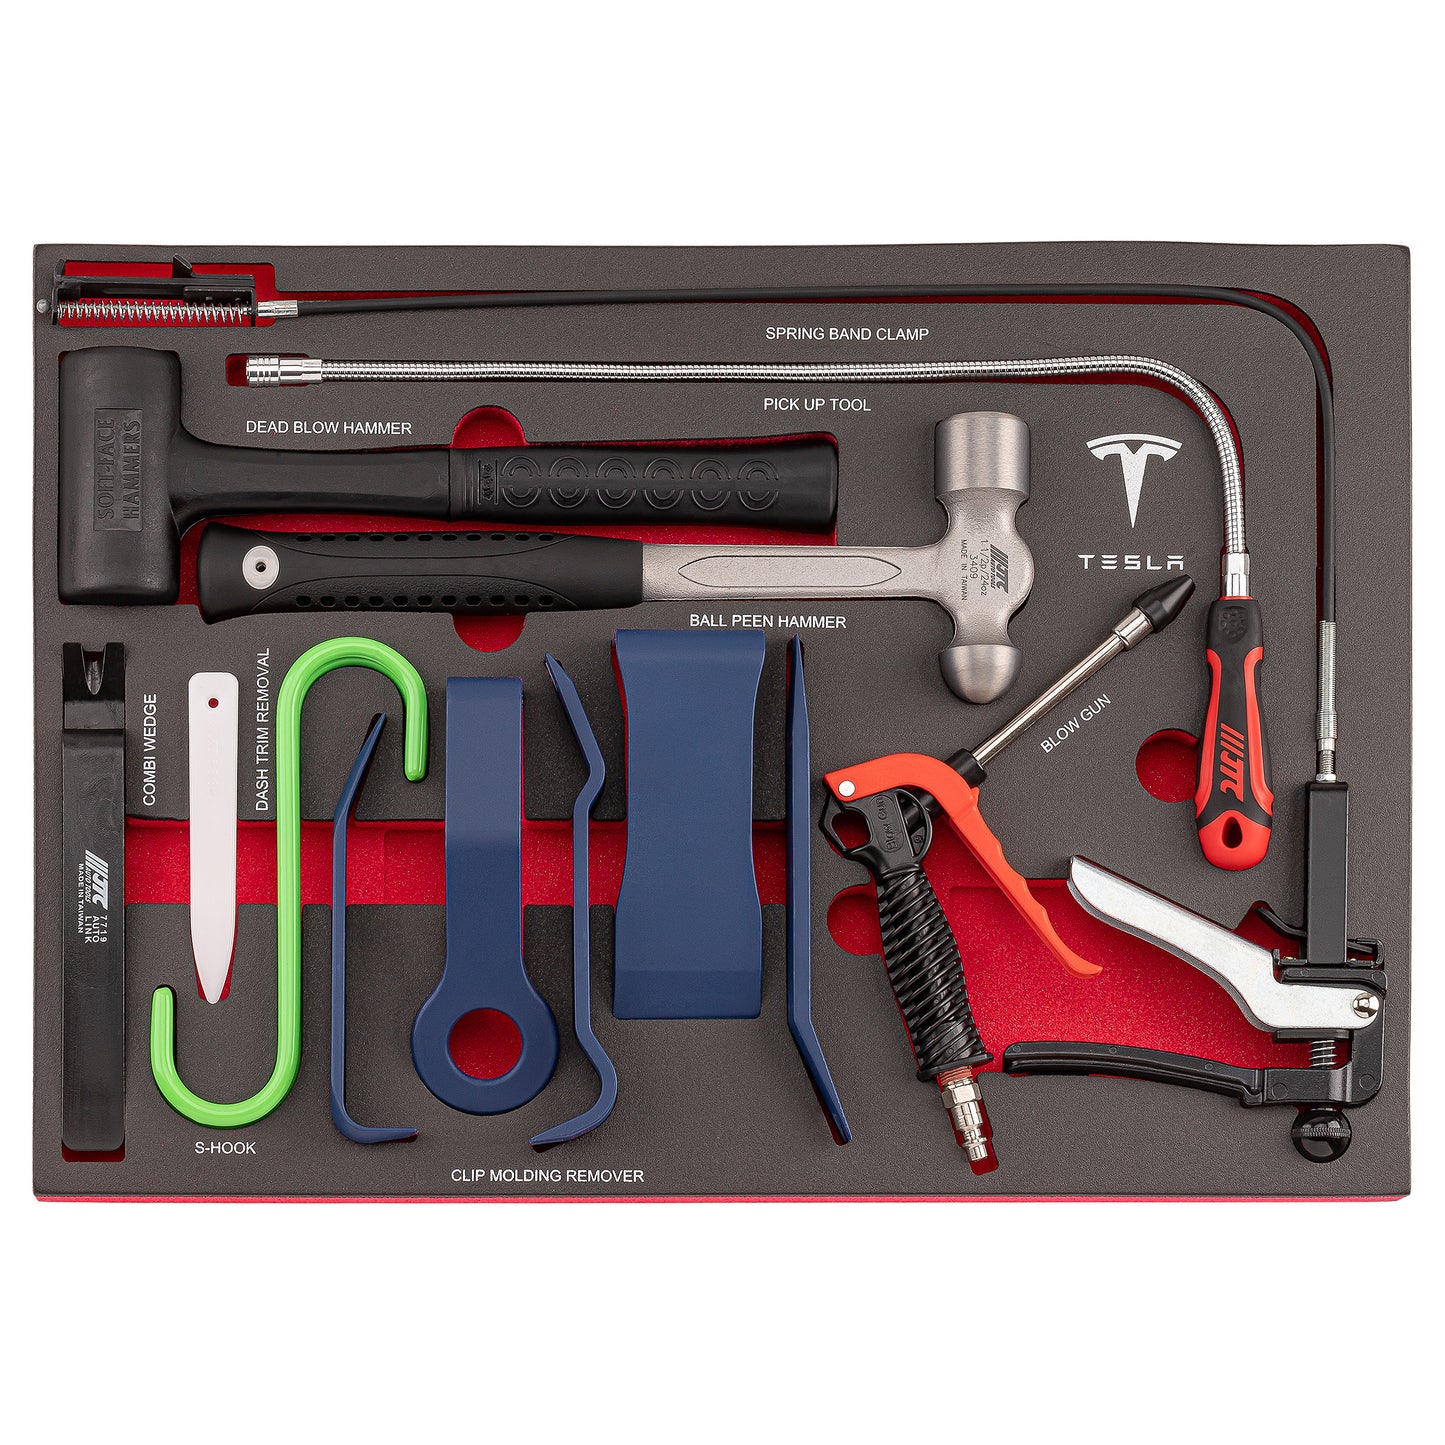 SHARED WORK BAY TOOL CART (MEMBER ONLY)